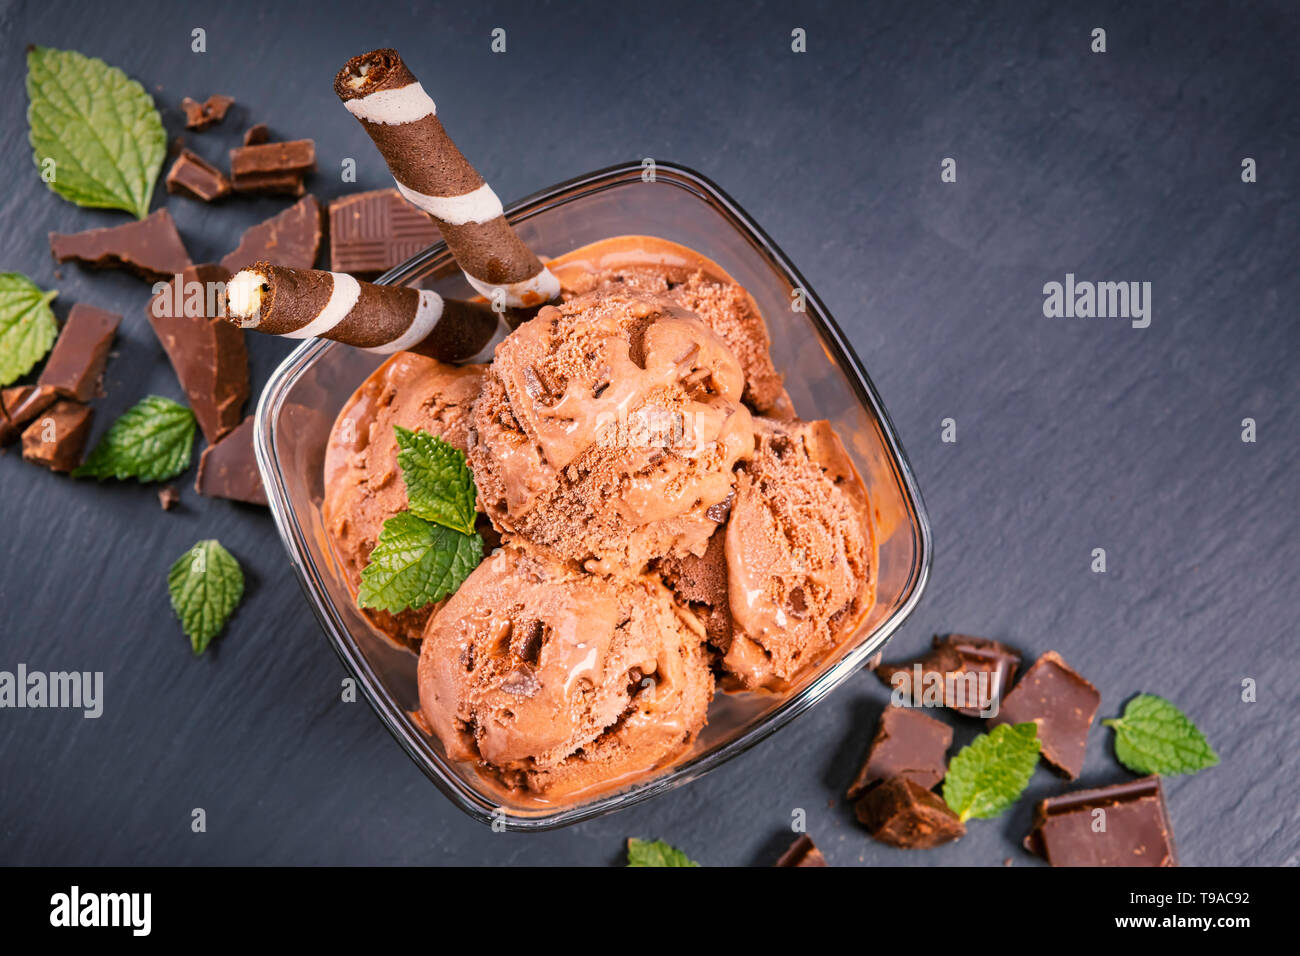 Scoops chocolate ice cream in glass bowl with wafer sticks, cone and chocolate on a black slate board. Focus on Bowl with scoops chocolate ice cream Stock Photo